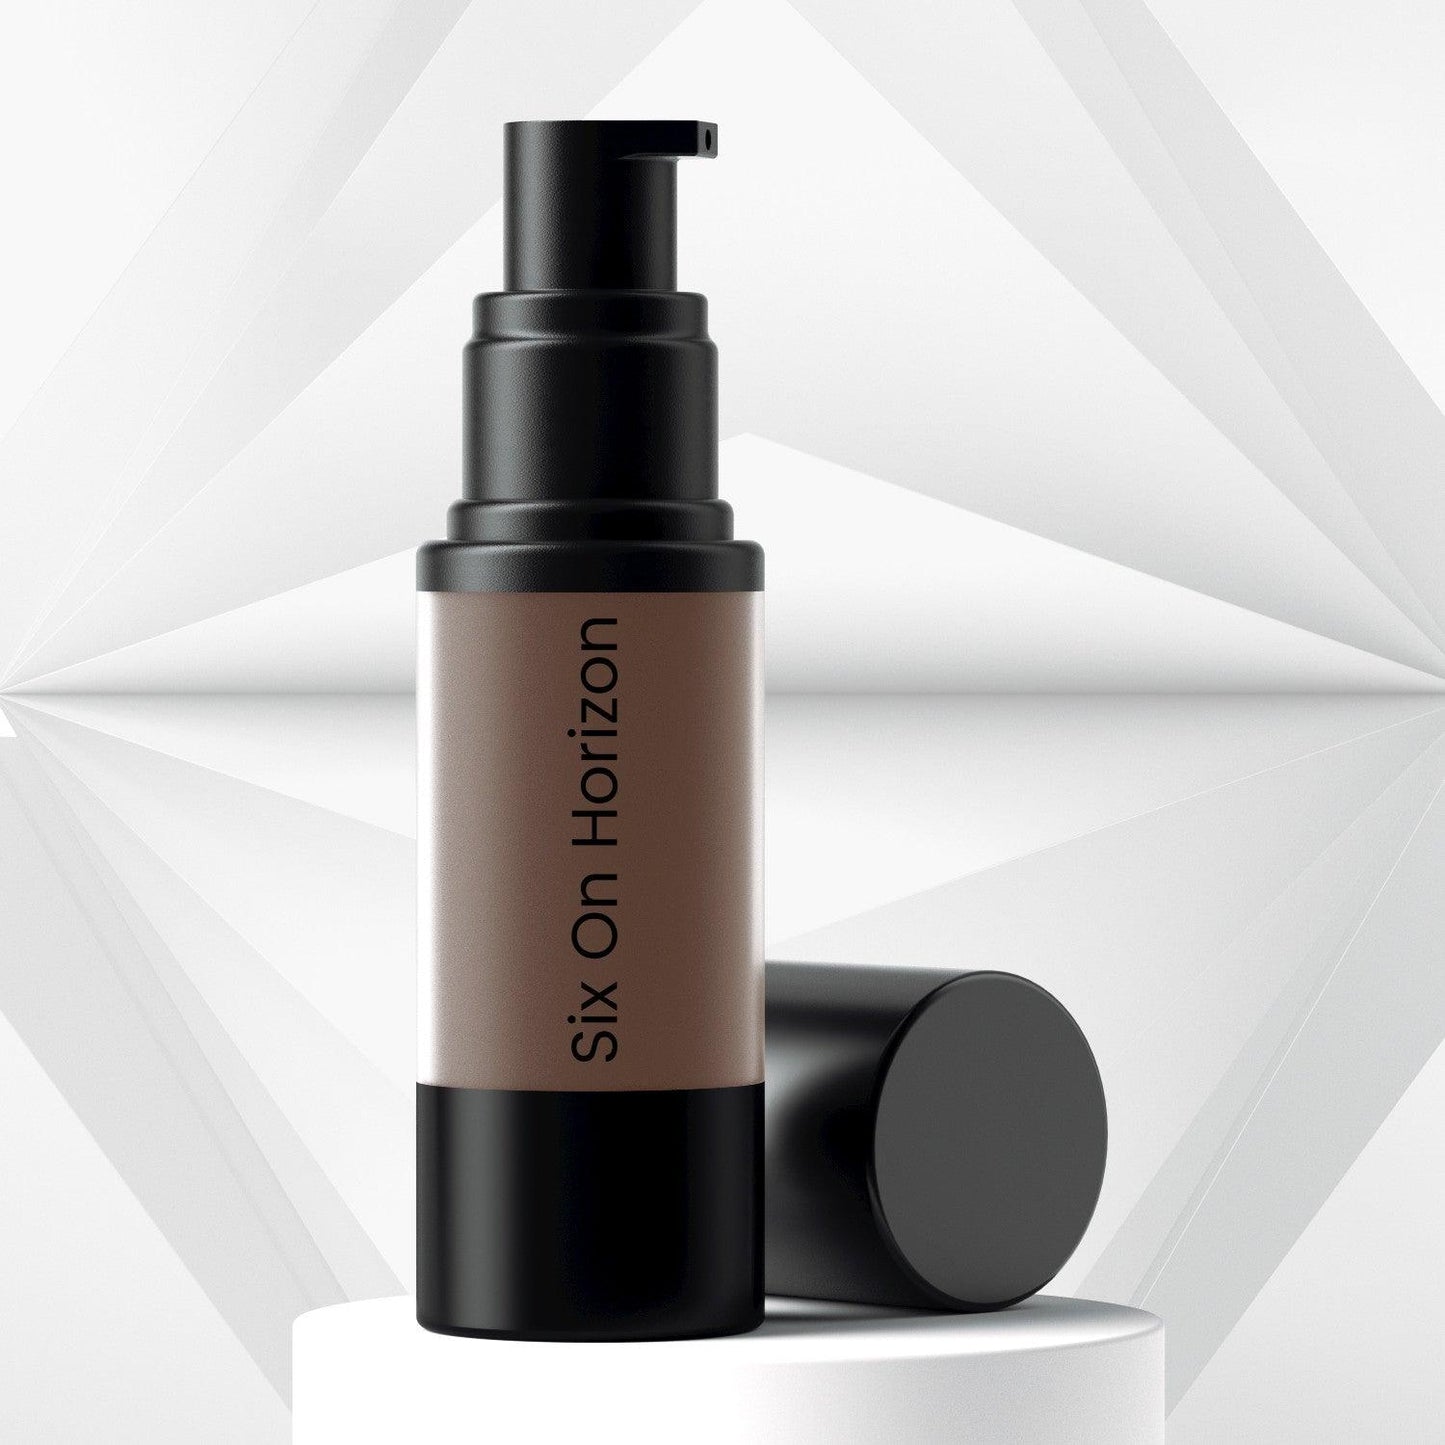 Camera-ready Foundations - six-on-horizon Anti-aging, Biodegradable, Cruelty-free, Eco-friendly packing, For all skin types, Gluten-free, Made in Canada, Made in small-batches, Natural, No artificial colours, Not sourced from China, Paraben-free, subscriber, Talc-free, Vegan 40.00 www.sixonhorizon.com